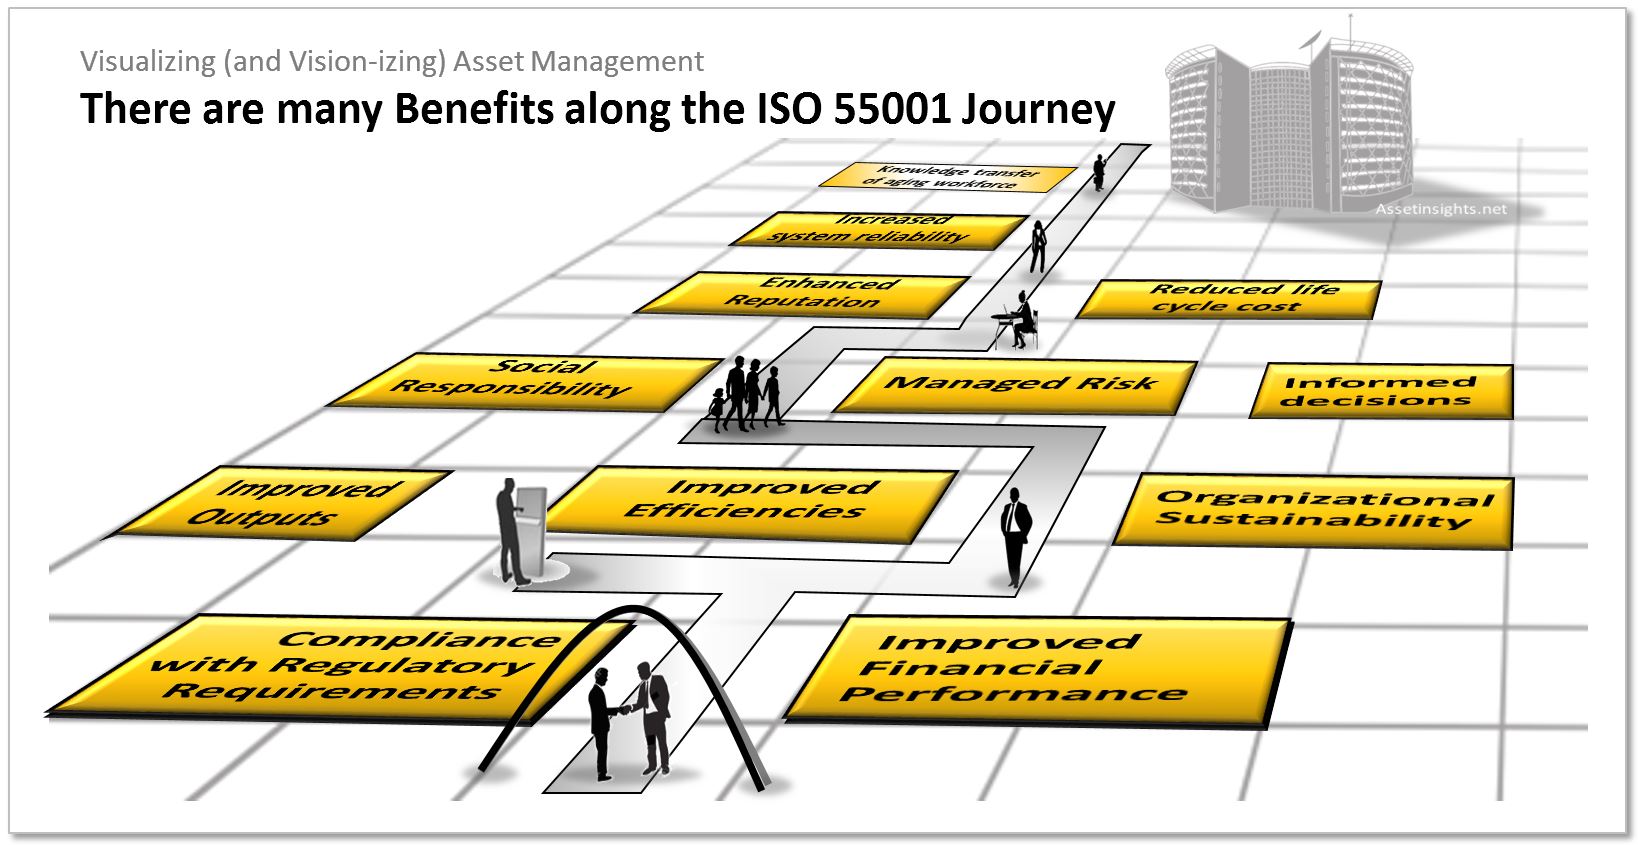 The image identifies the following benefits of ISO 55001 implementation, including enhanced knowledge transfer, system reliability, reputation, social responsibility, outputs, efficiences, sustainability and financial performance. It also notes that risks are managed, costs are reduced and that it is easier to comply with regulations and make informed decisions.